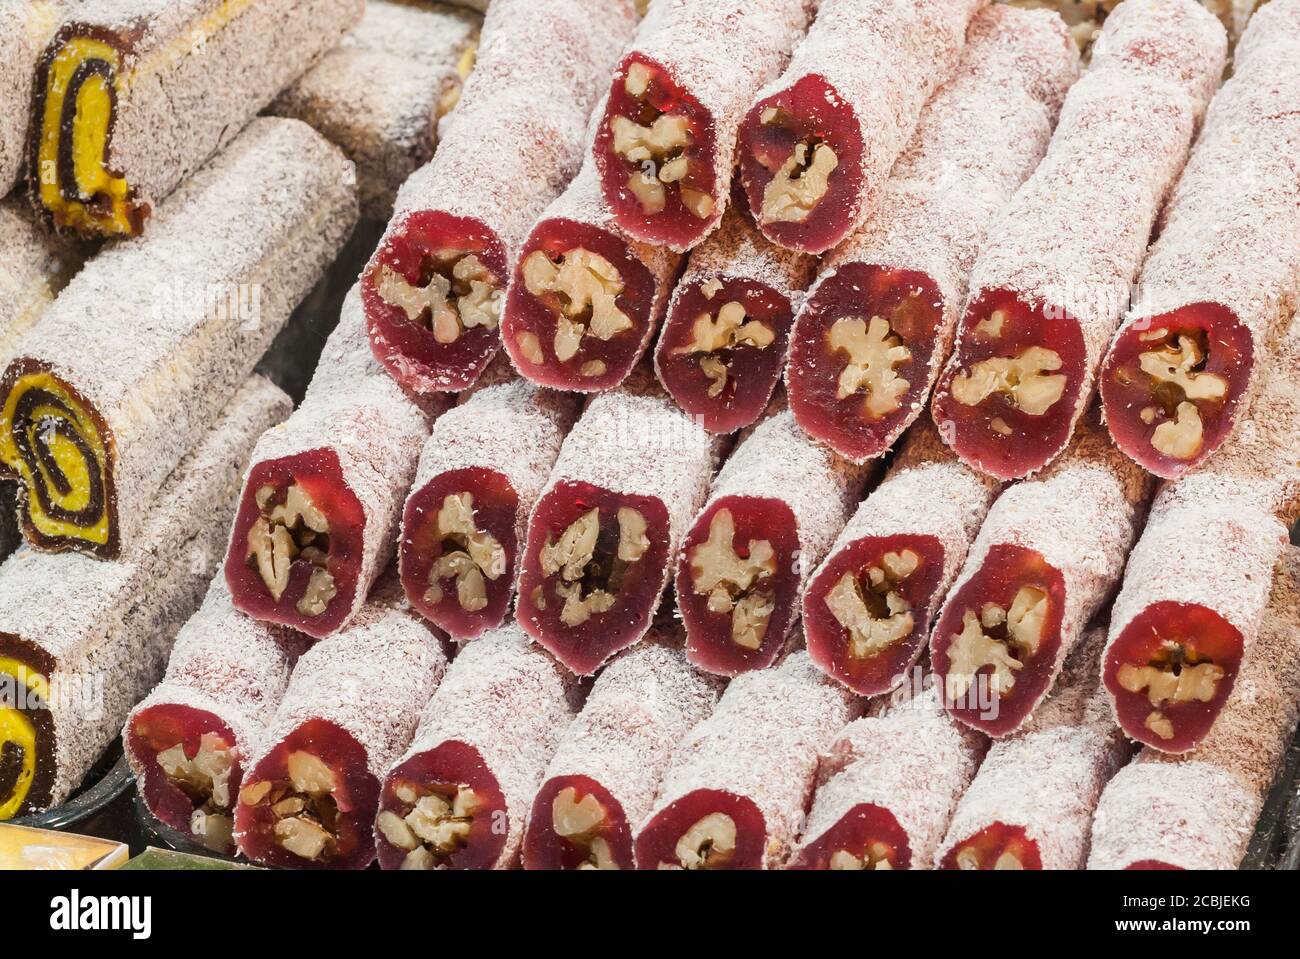 Colorful Turkish delight (lokum) rolls assortment for sale in a market in Istanbul. These are a specialty food in Turkey. Stock Photo